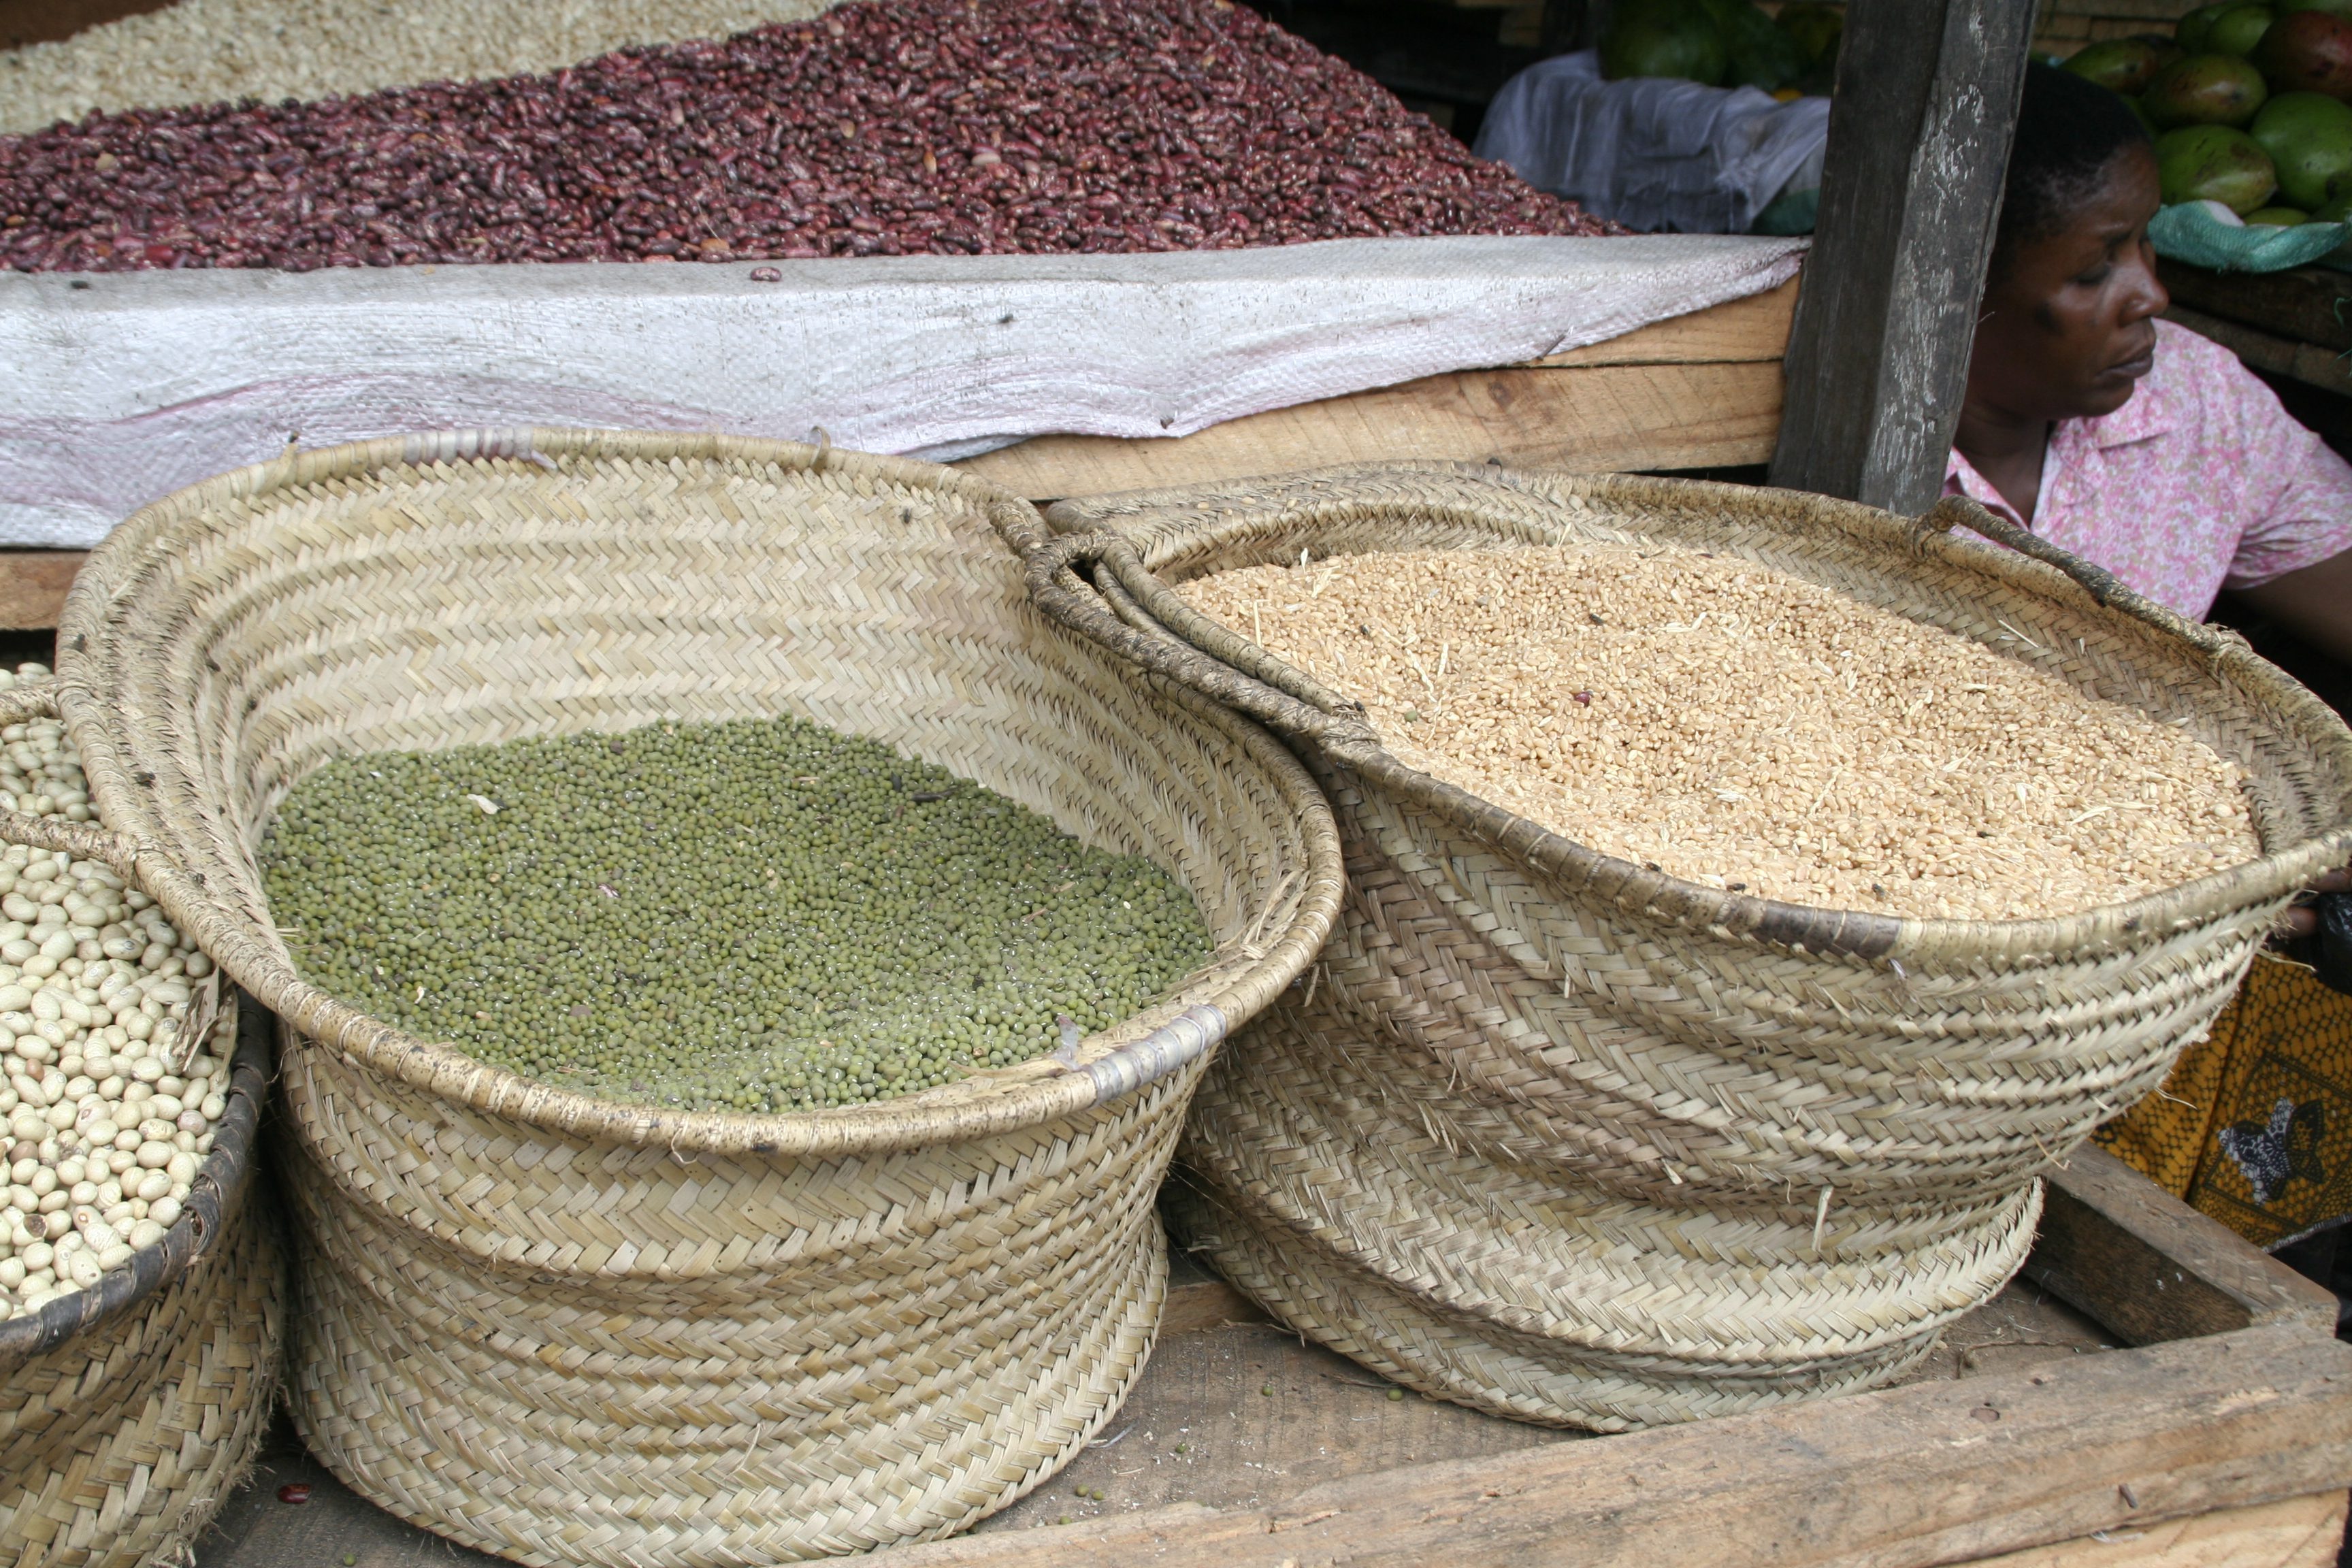 Beans for sale at a market in Dar es Salaam, Tanzania.  Racine Tucker-Hamilton for Bread for the World.